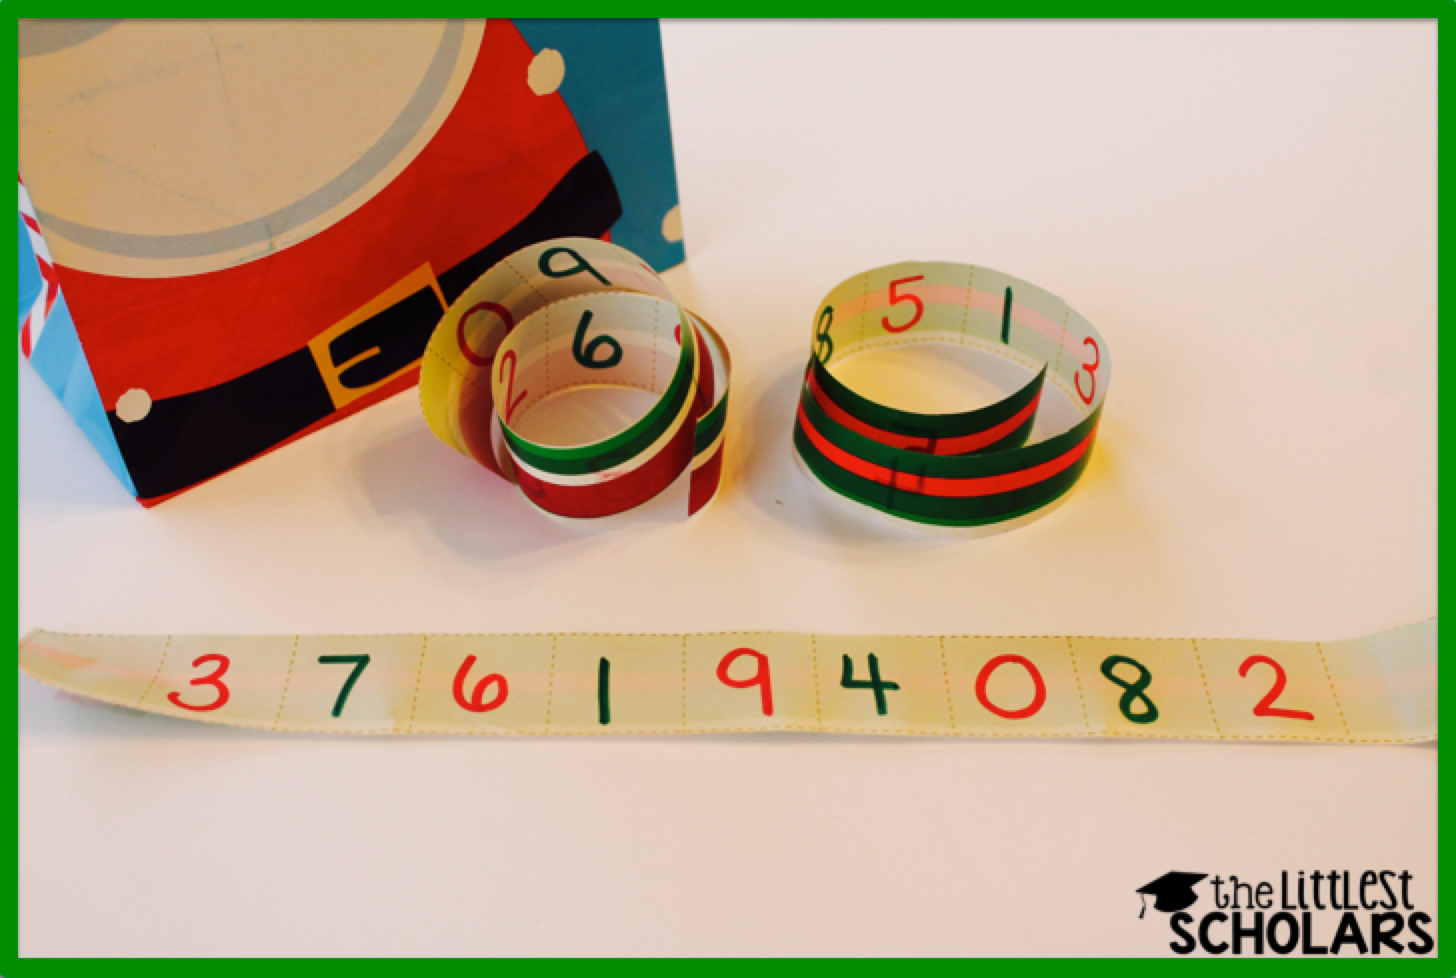 Write numbers on scraps of wrapping paper. Students choose a strip of paper and identify the numbers as quickly as they can. Perfect for AIMSweb! 